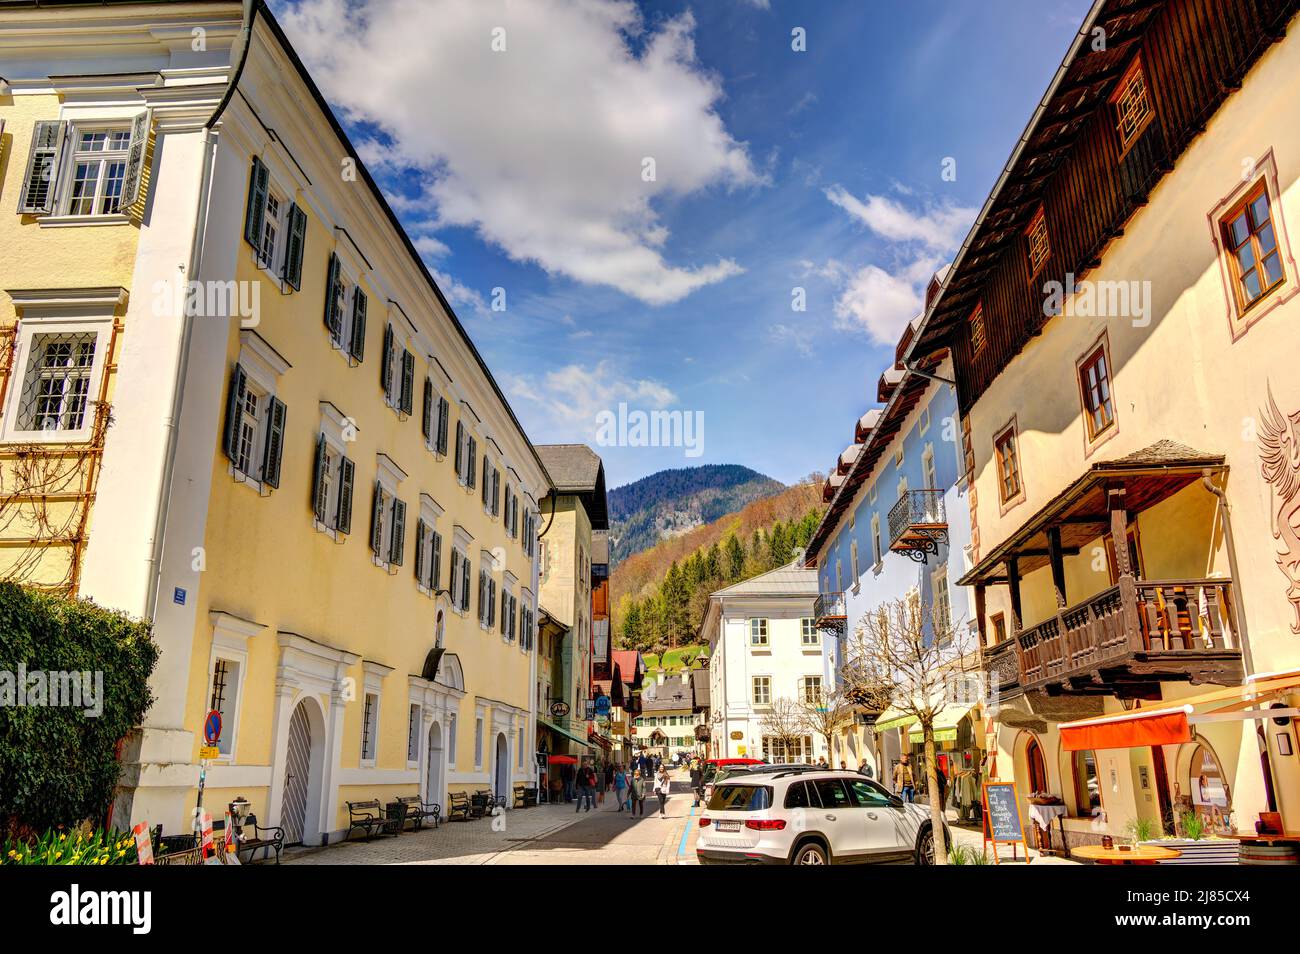 St Wolfgang, Austria, HDR Image Stock Photo